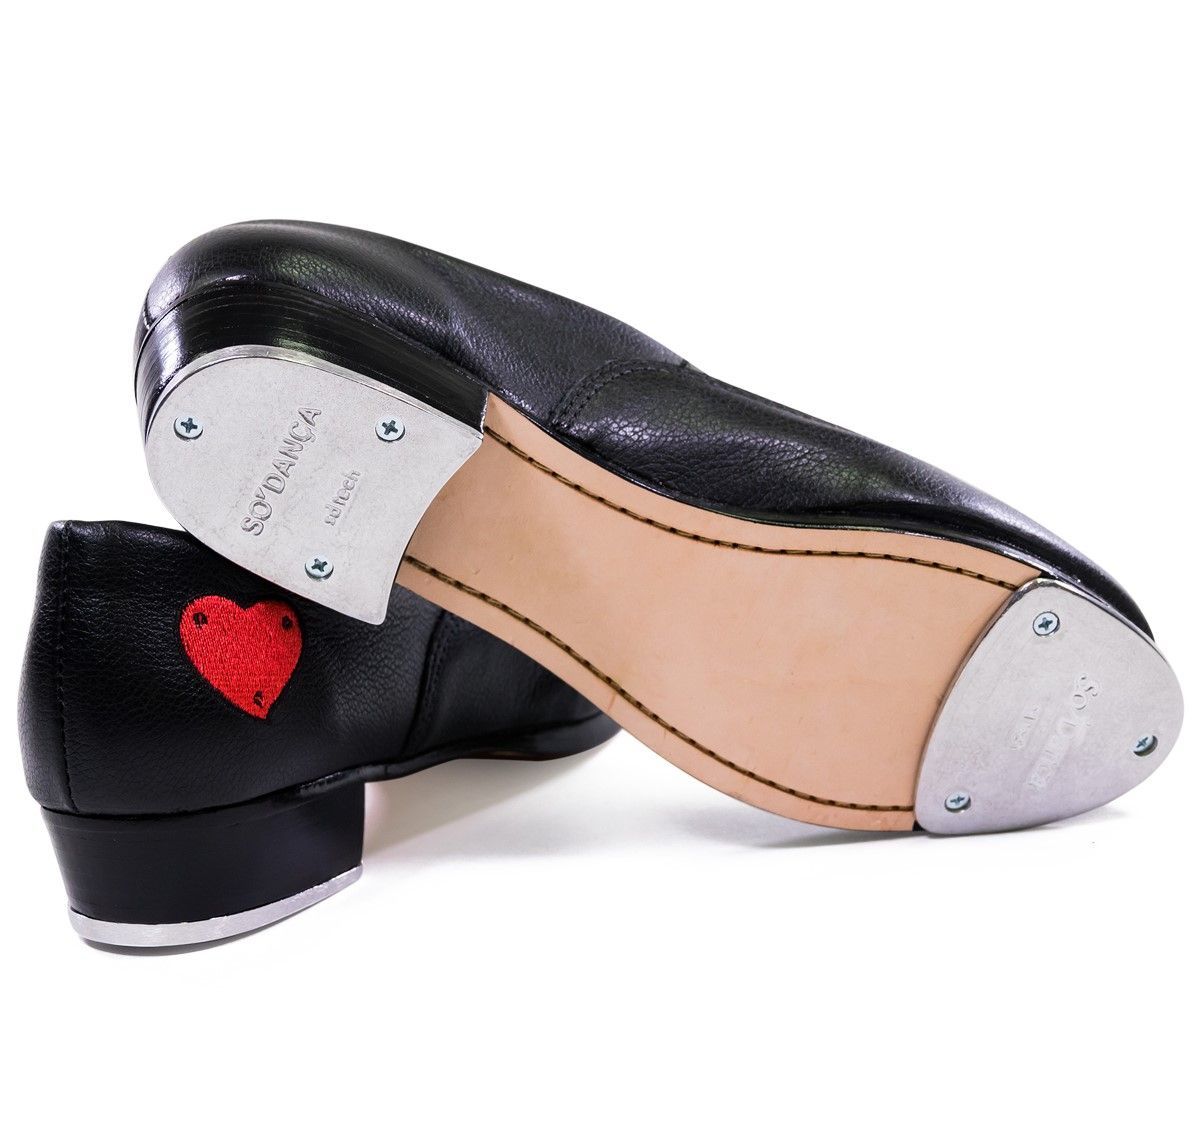 professional tap shoes